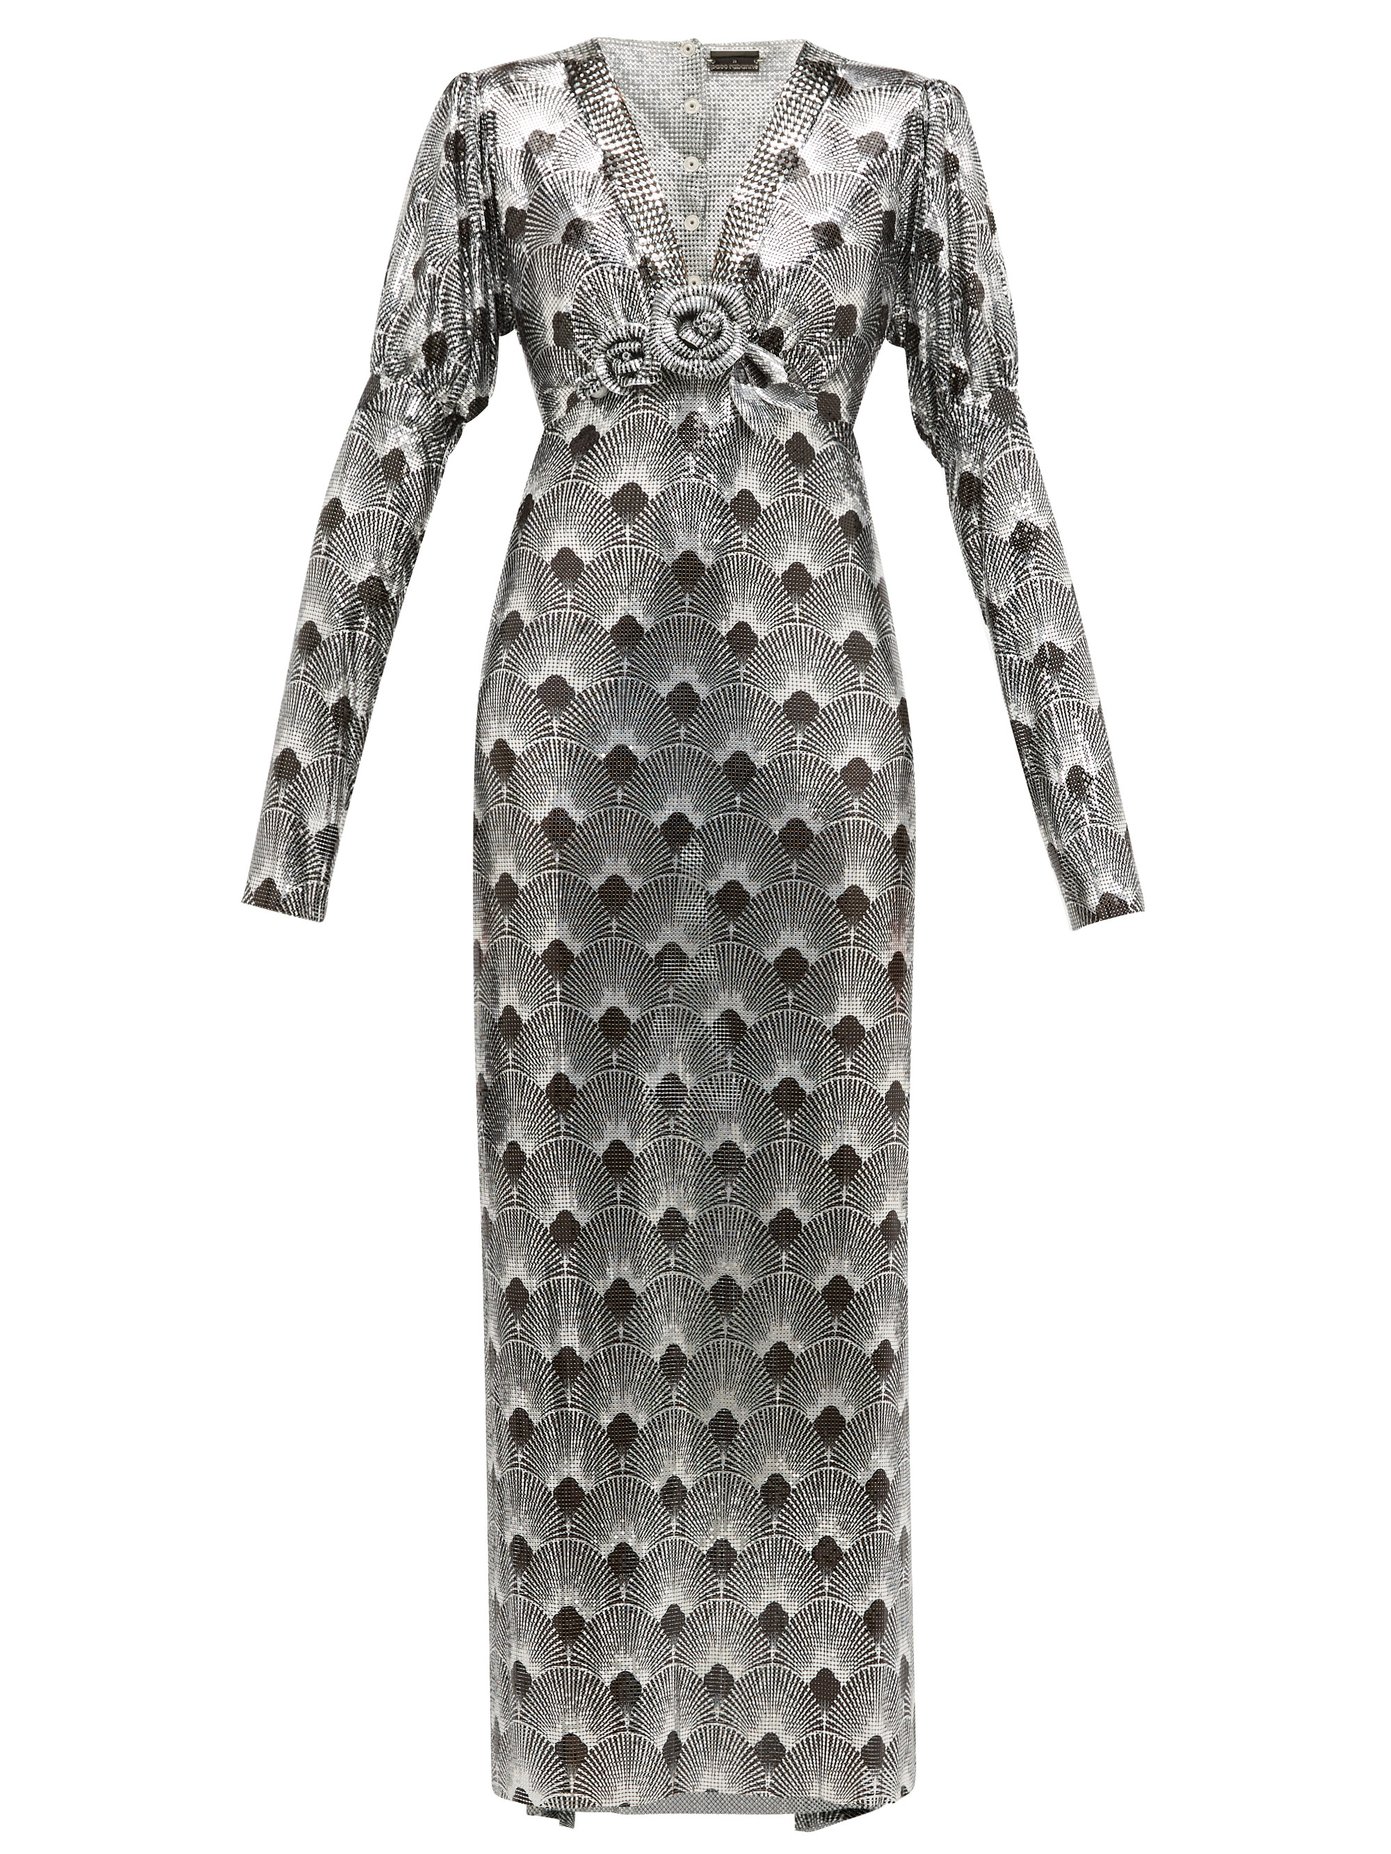 silver chainmail dress